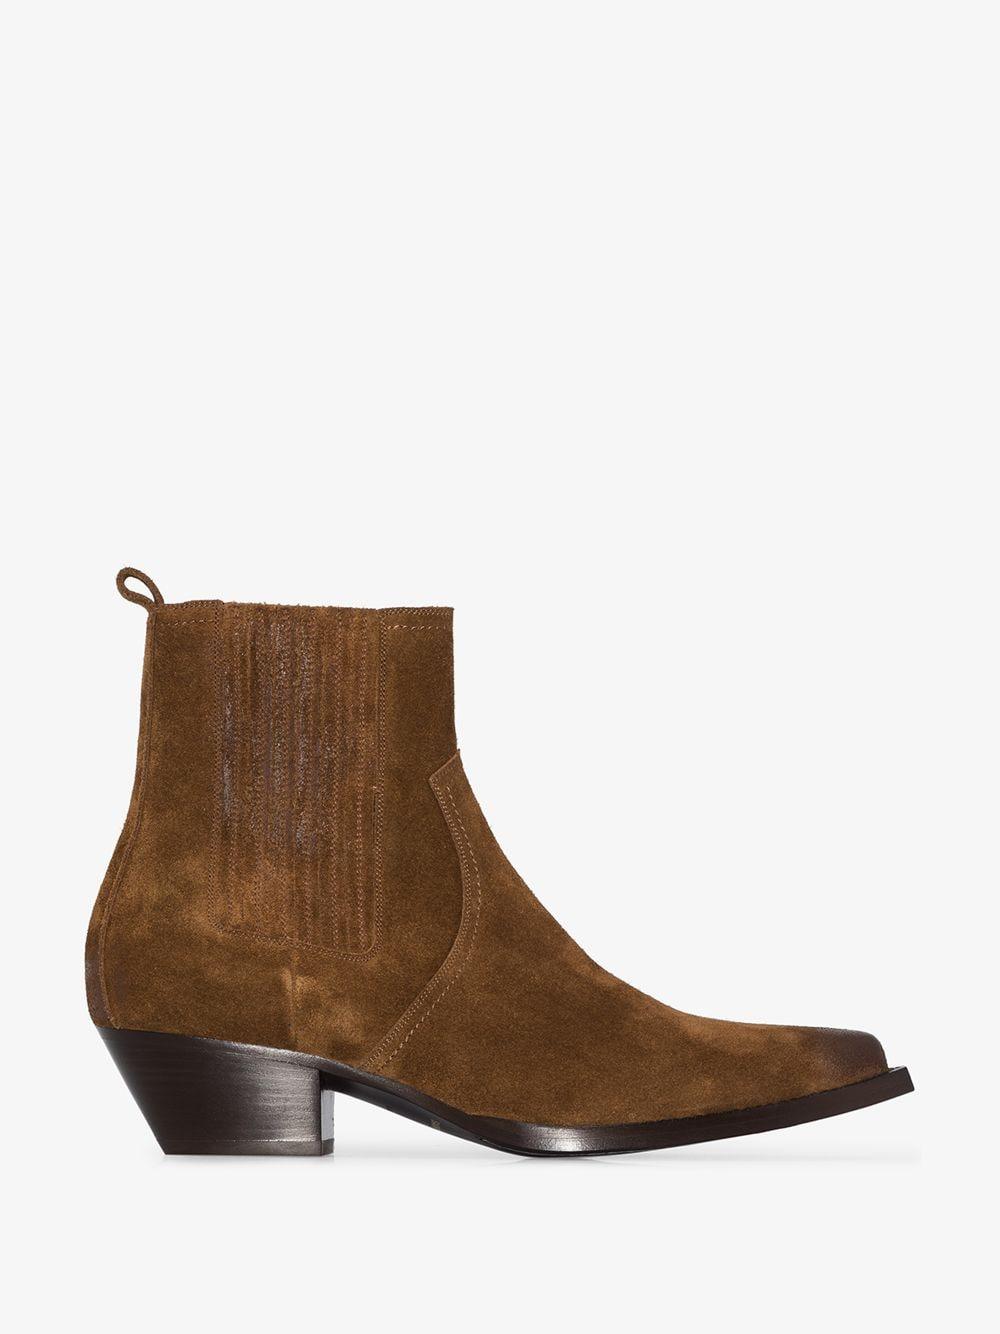 Saint Laurent Lukas Suede Boots in Brown for Men - Save 25% - Lyst